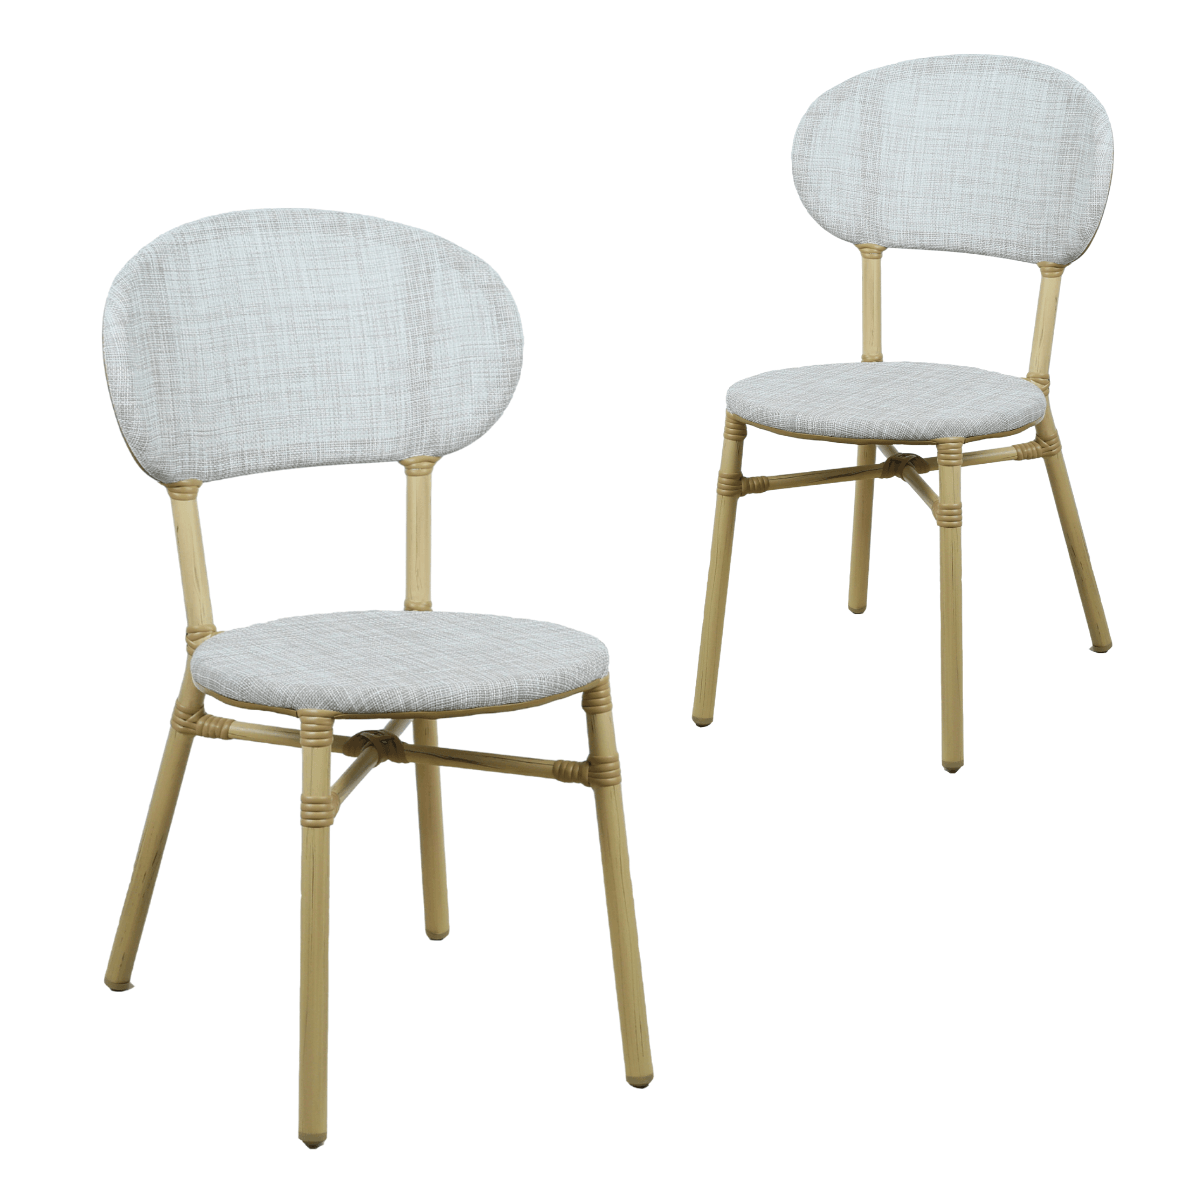 Skyler Style-savvy Outdoor Dining Chair Set of Two Dark